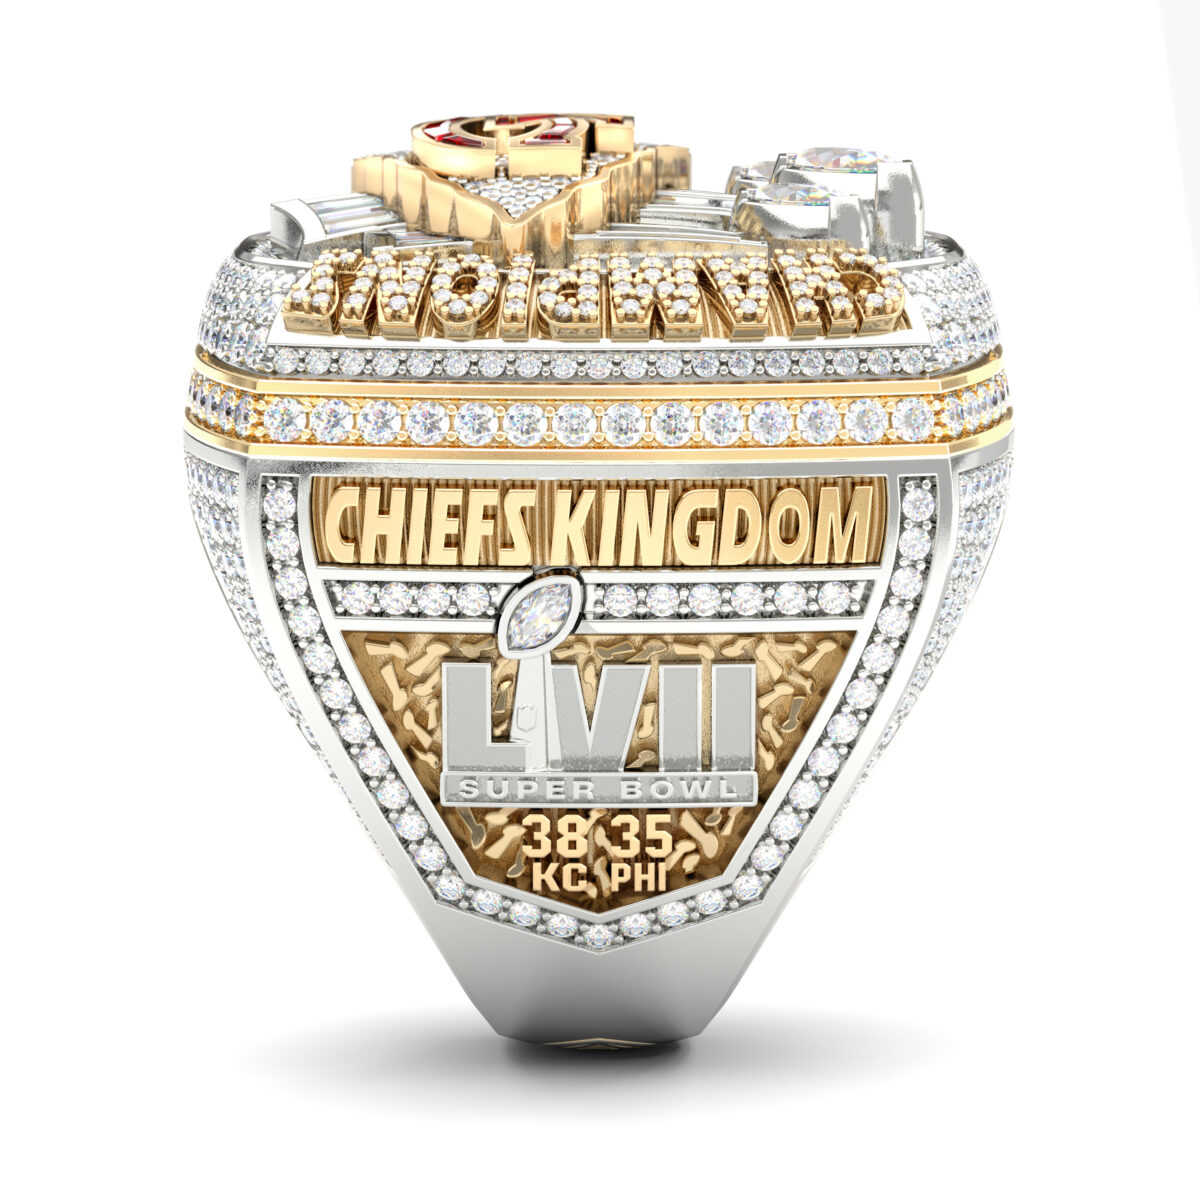 Kingdom Short to show creation of Chiefs’ Super Bowl LVII ring